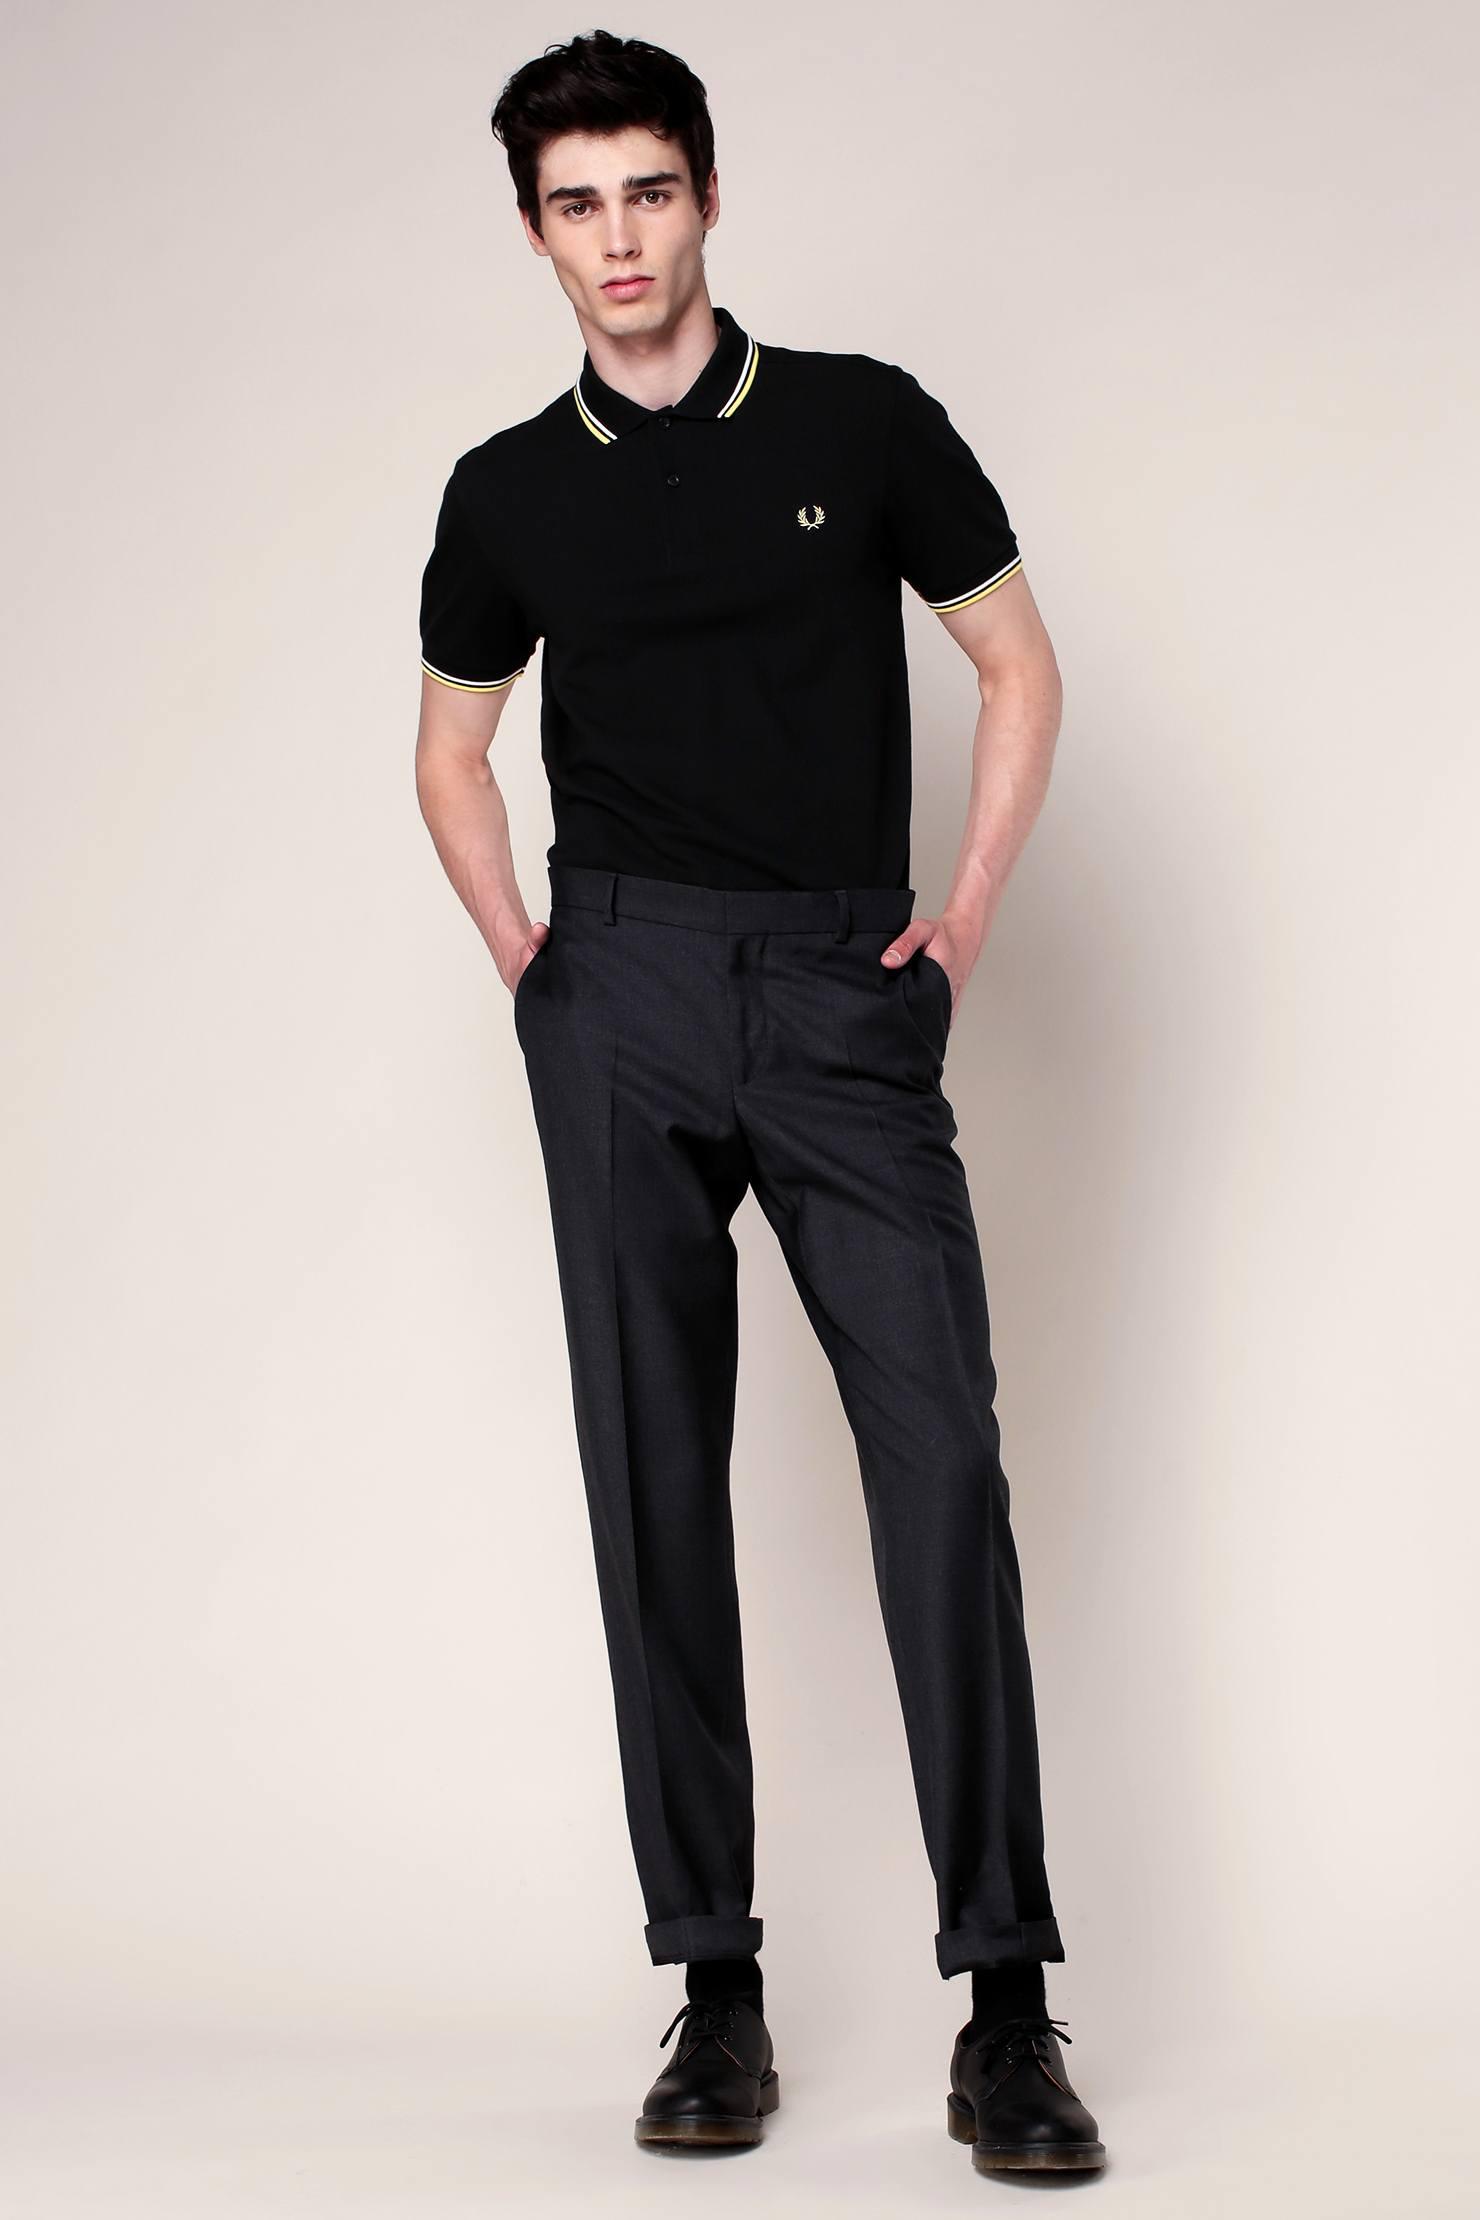 Lyst Fred Perry Polo Shirt In Black For Men 